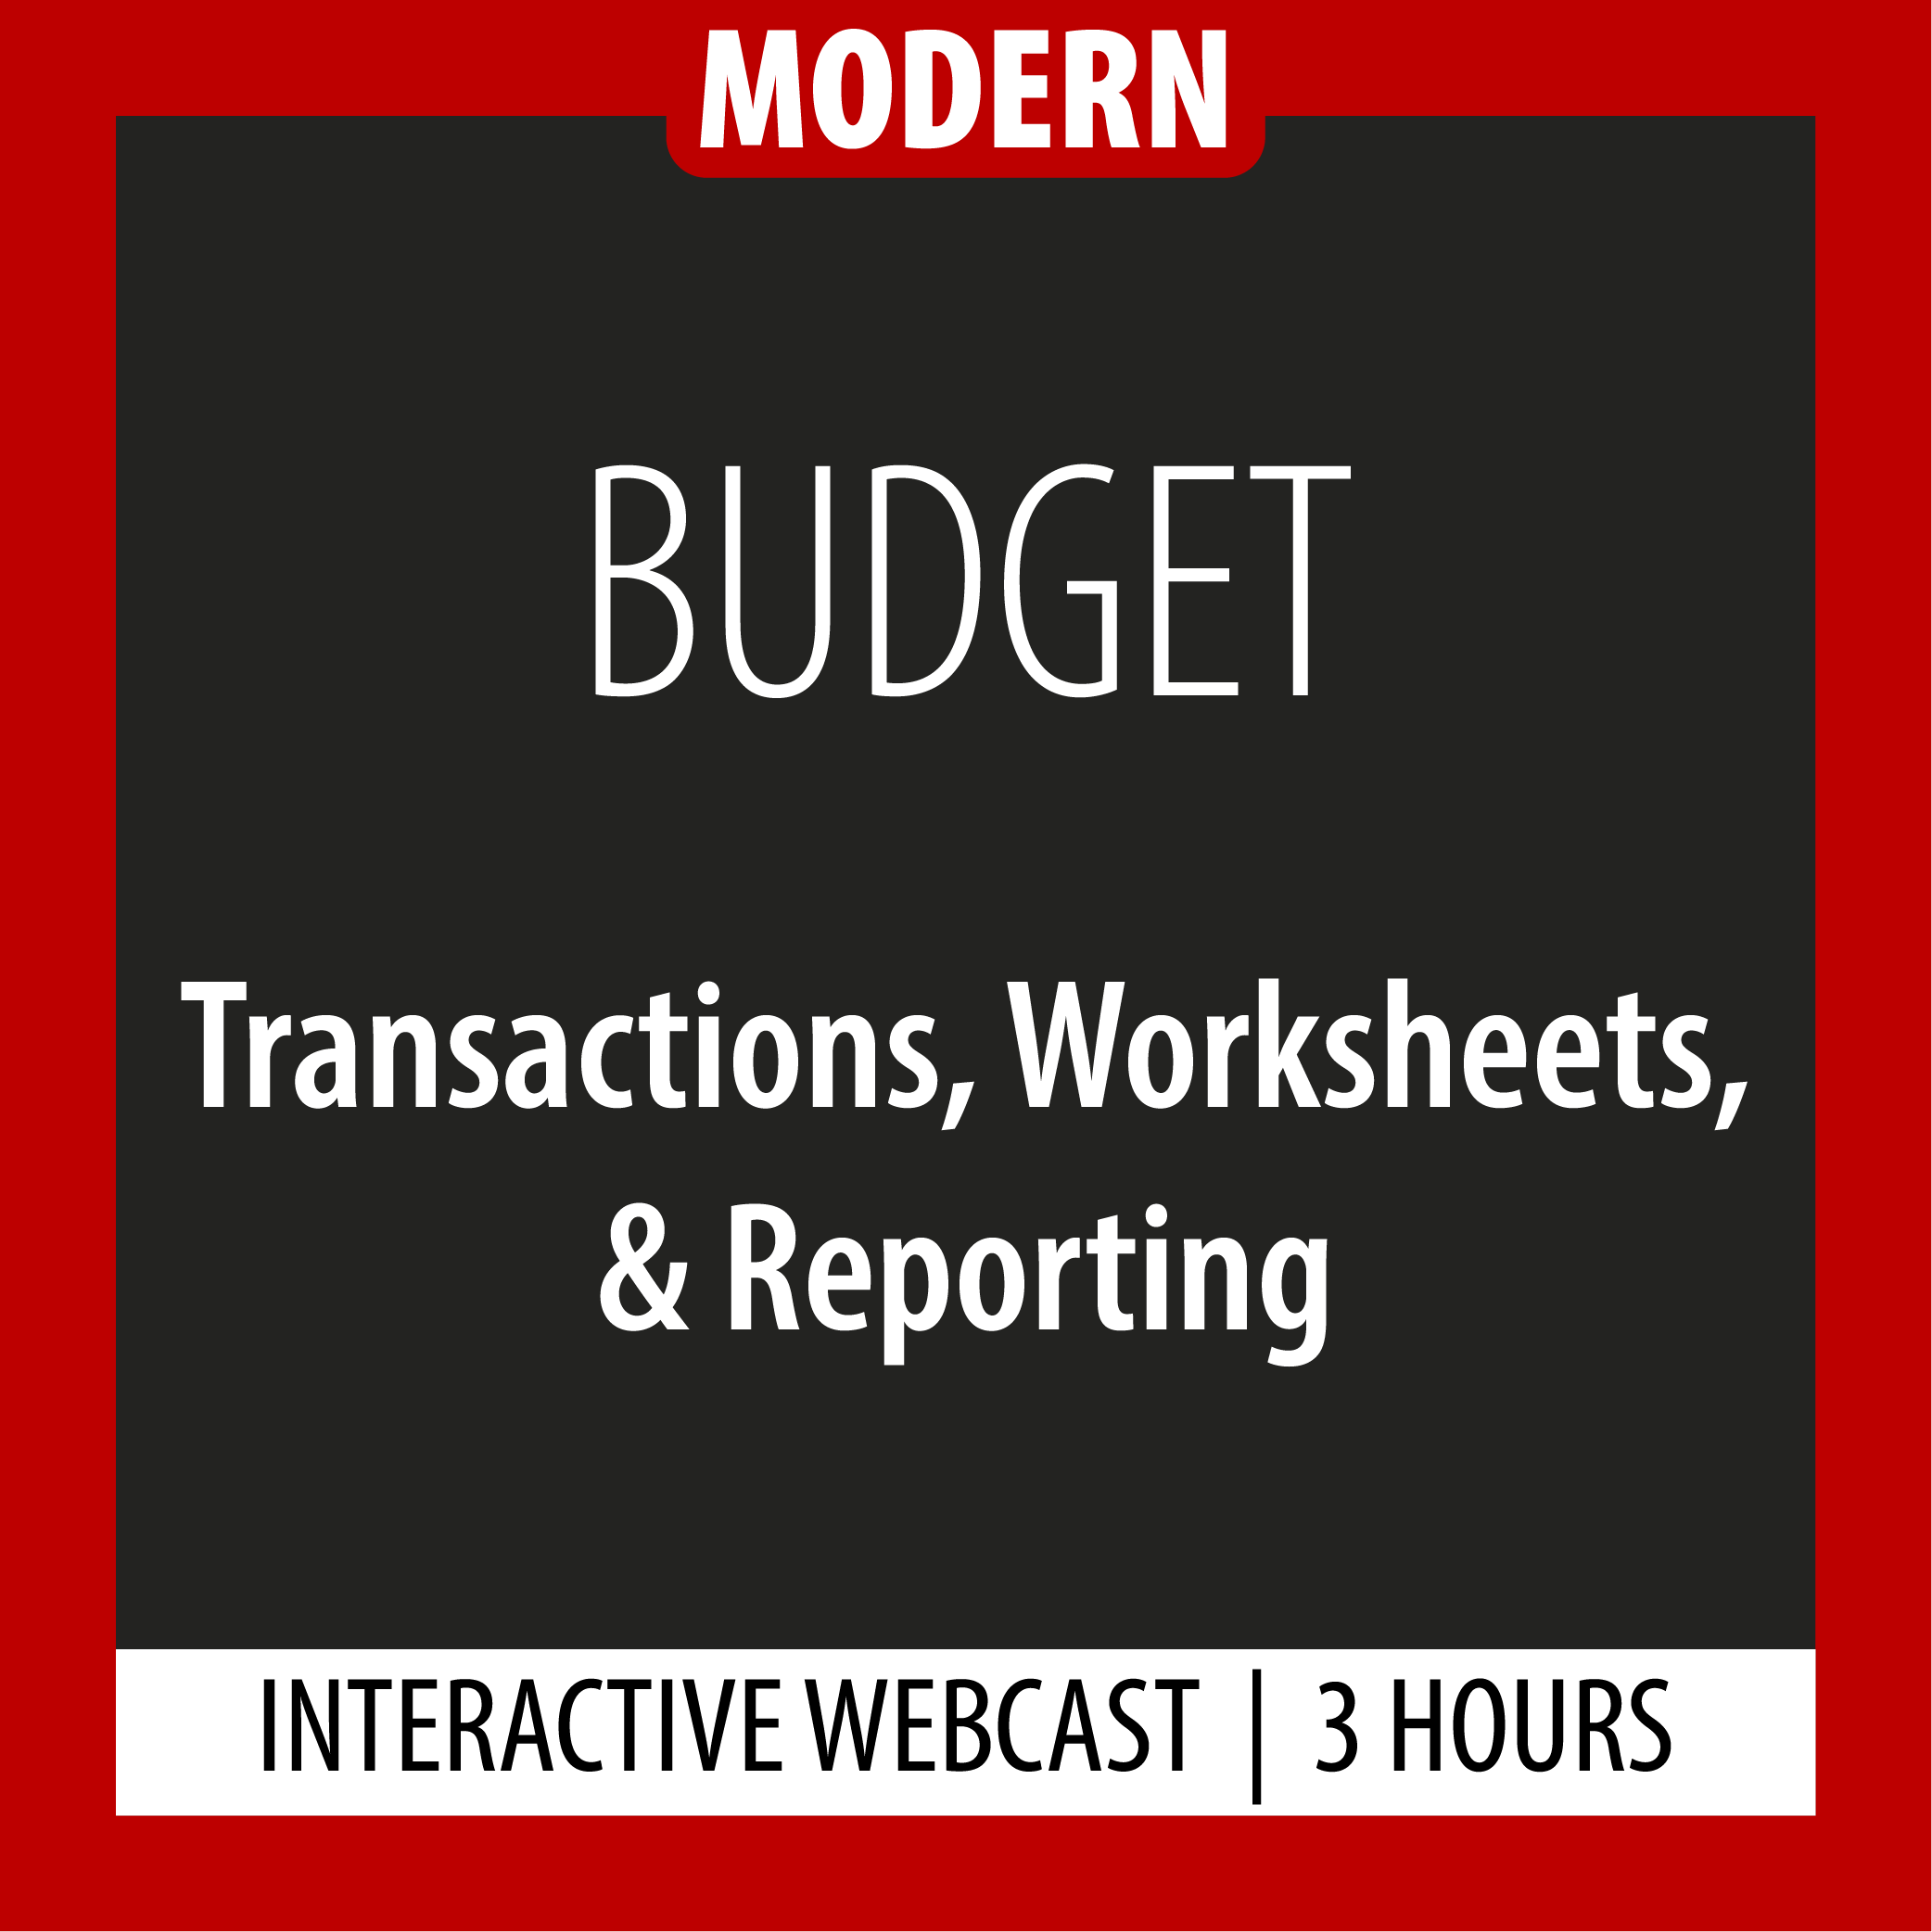 Modern - Budget - Transactions, Worksheets, & Reporting - Webcast - 3 Hours